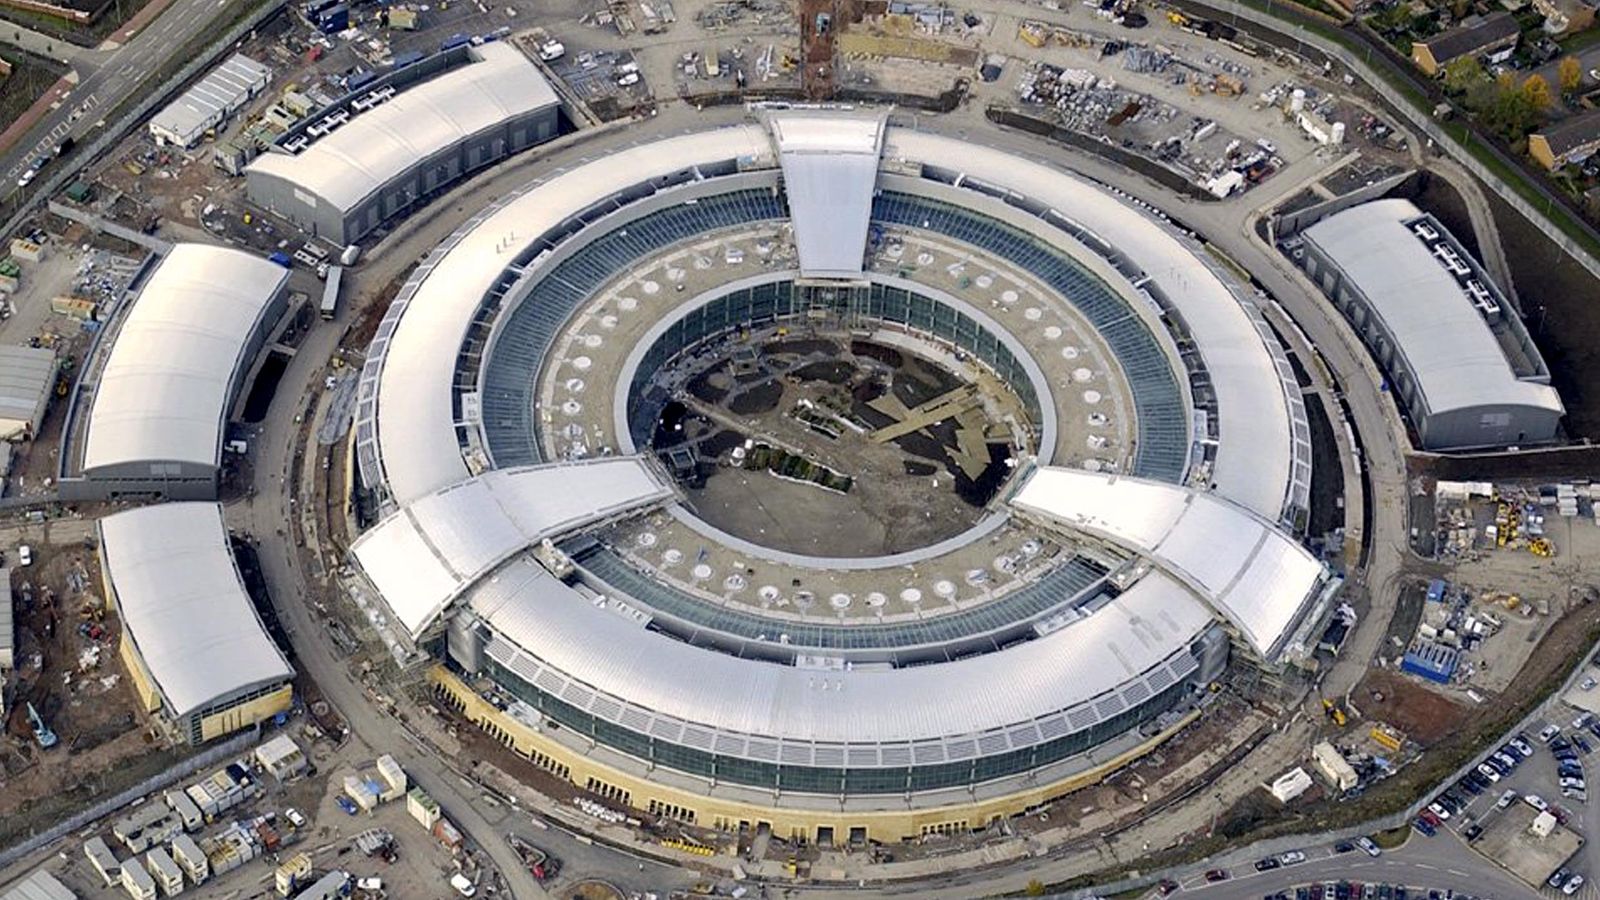 ‘American spy working at GCHQ’ was stabbed in suspected terror incident | UK News